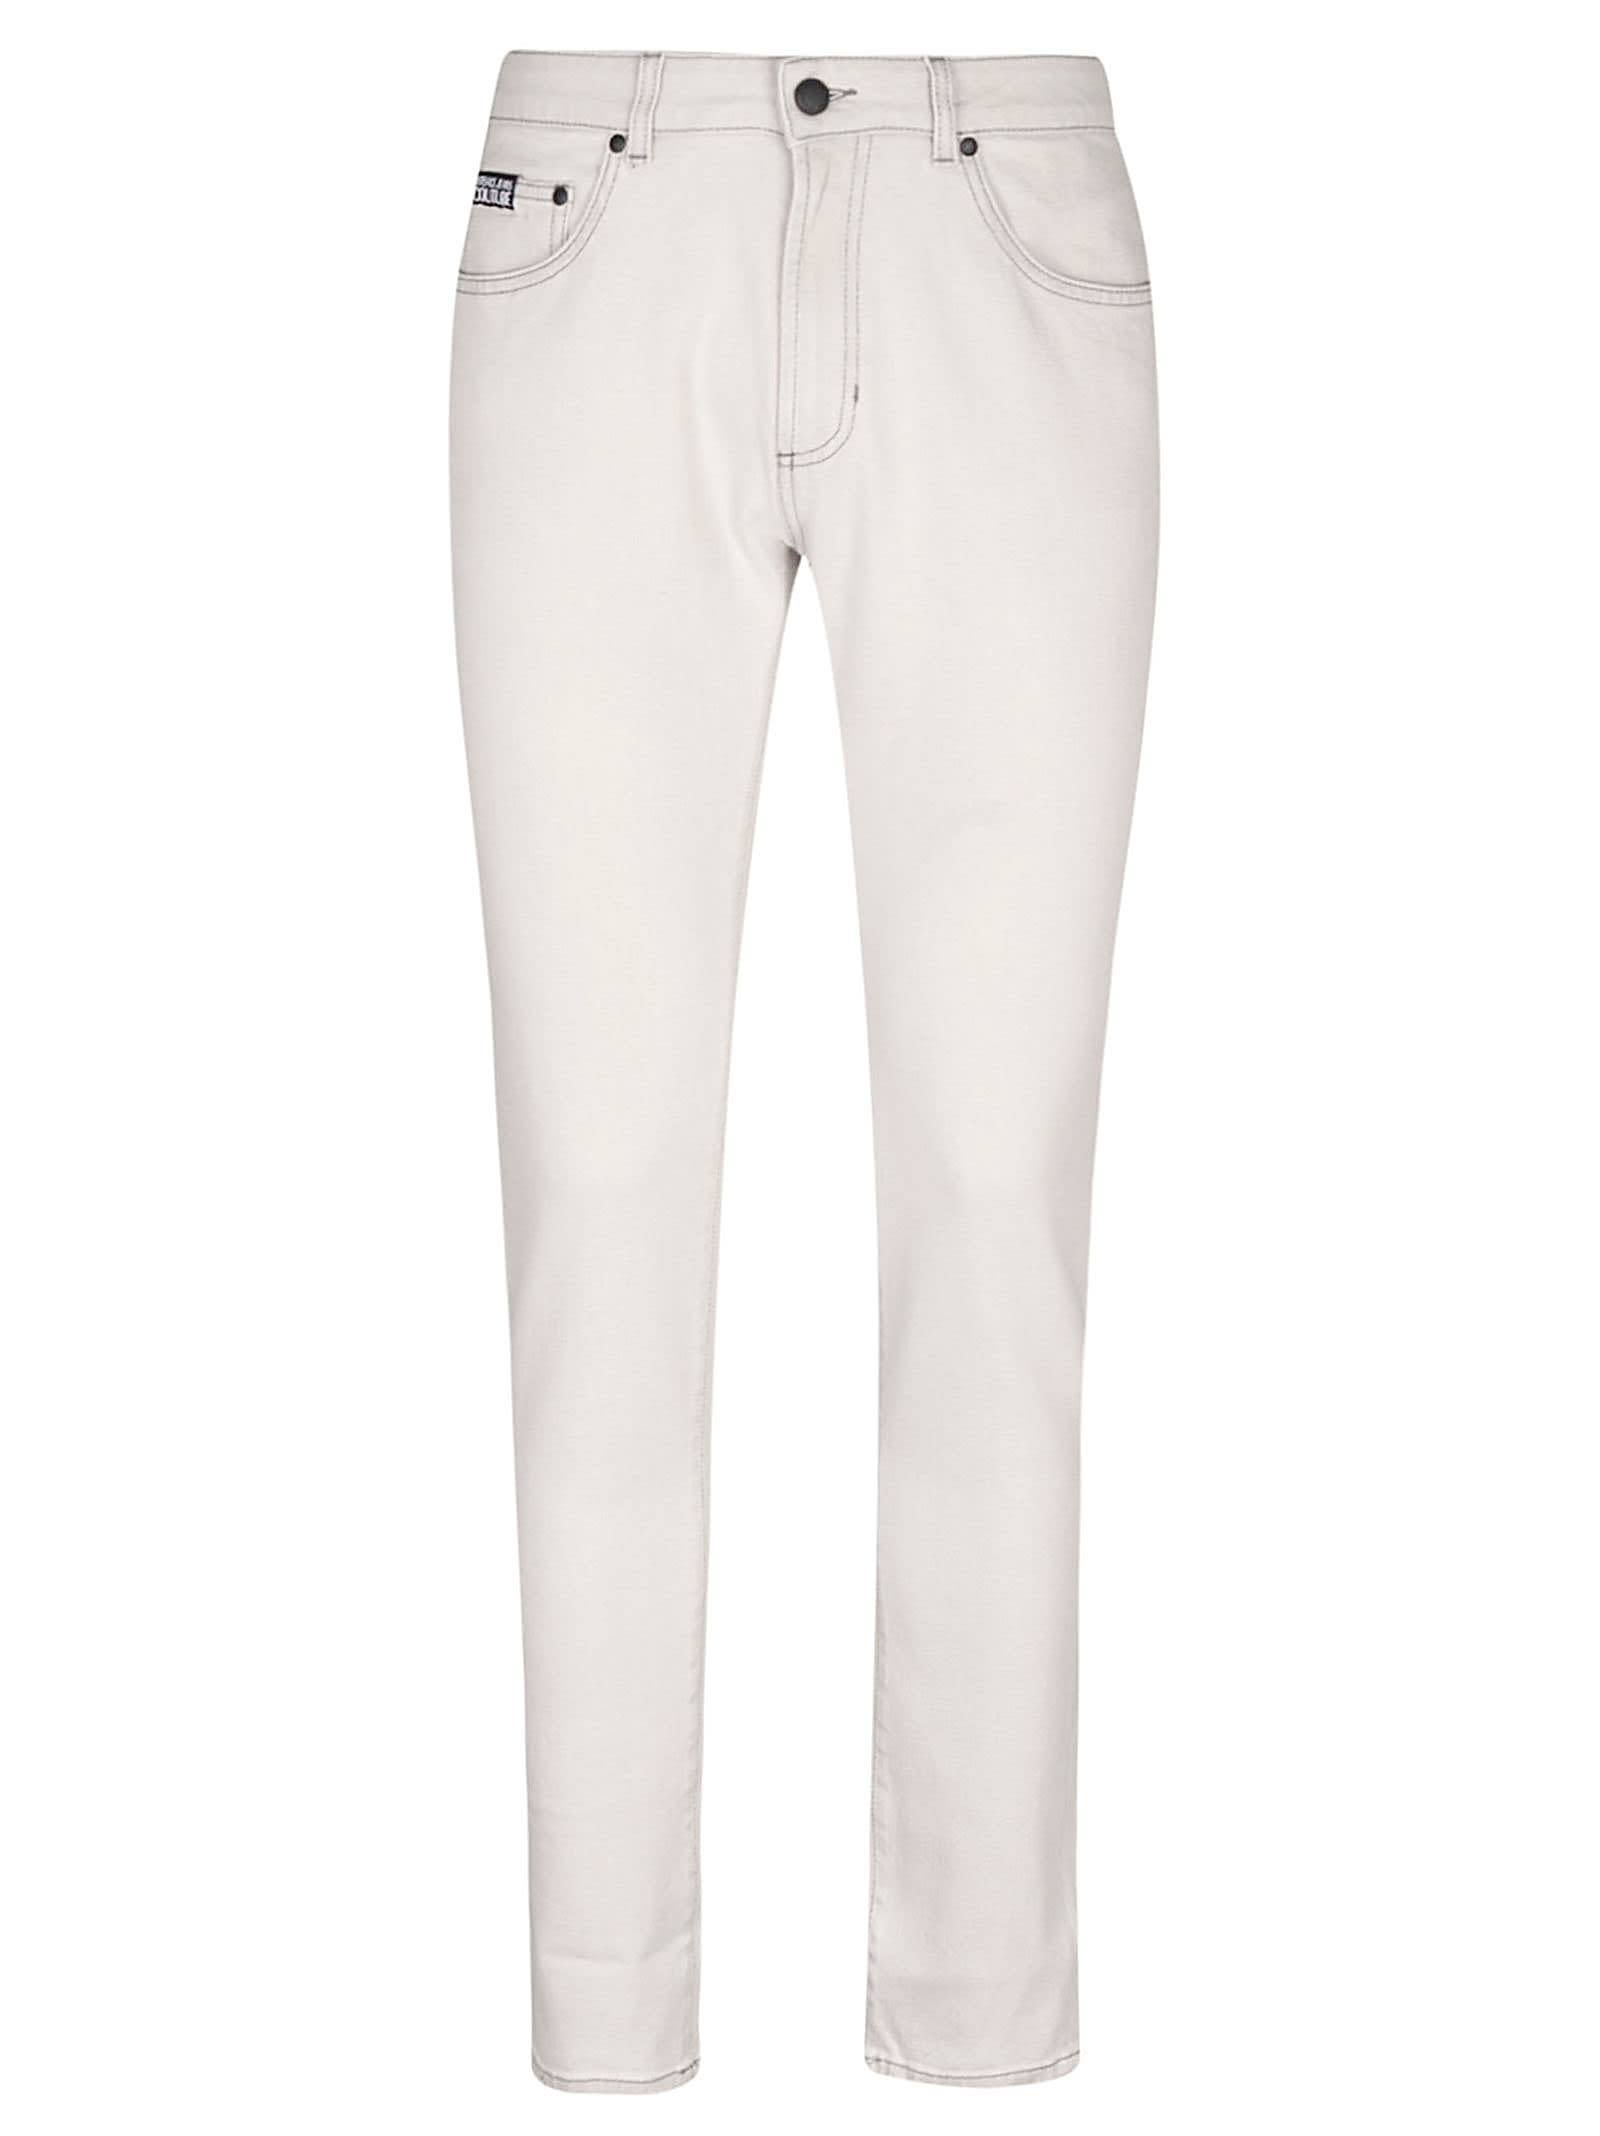 Versace Jeans Couture London Skinny Mix Jeans